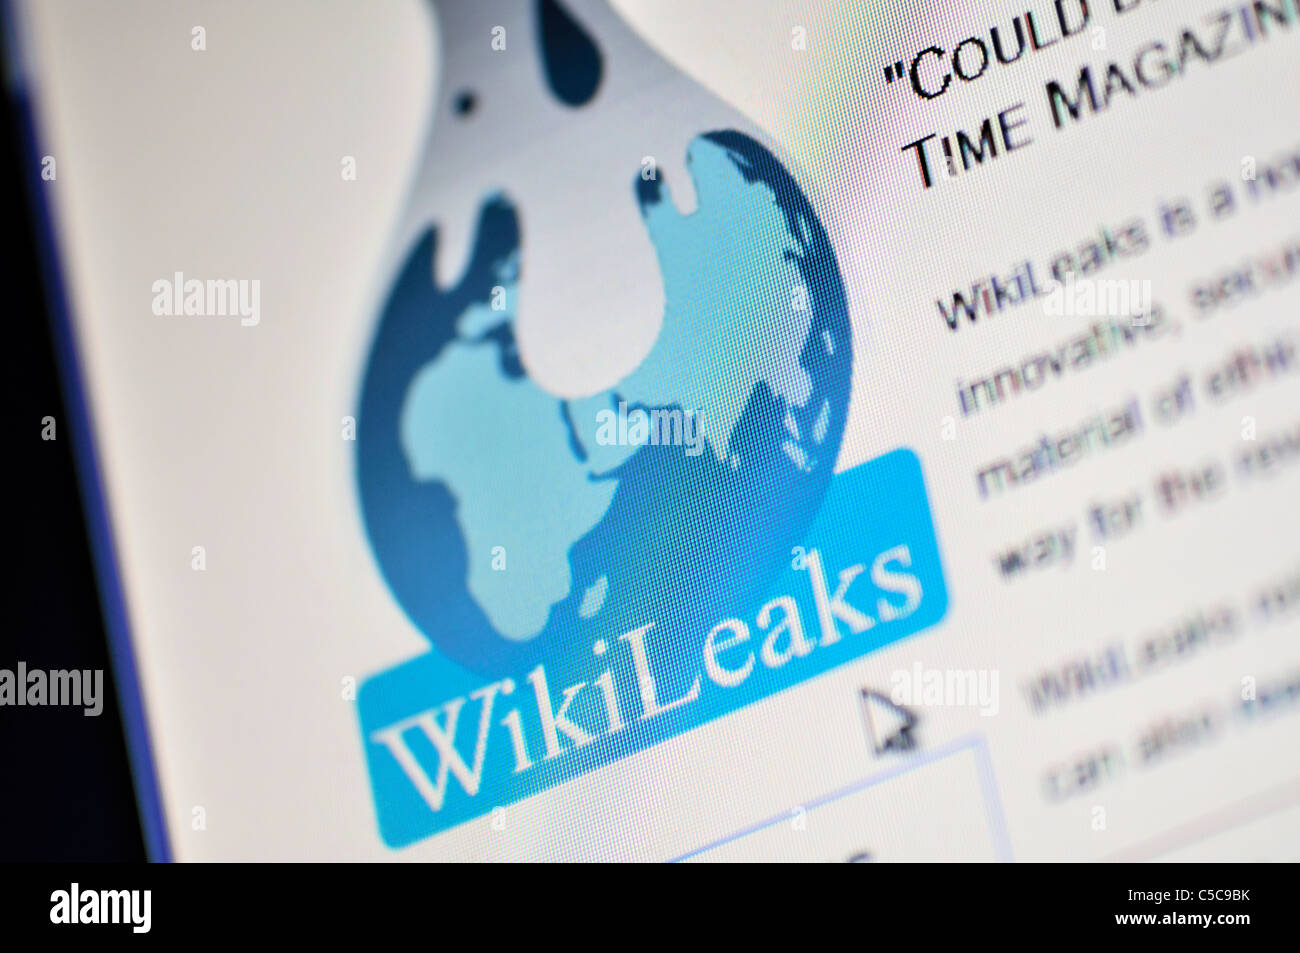 The Wikileaks website is displayed on a computer screen. Stock Photo